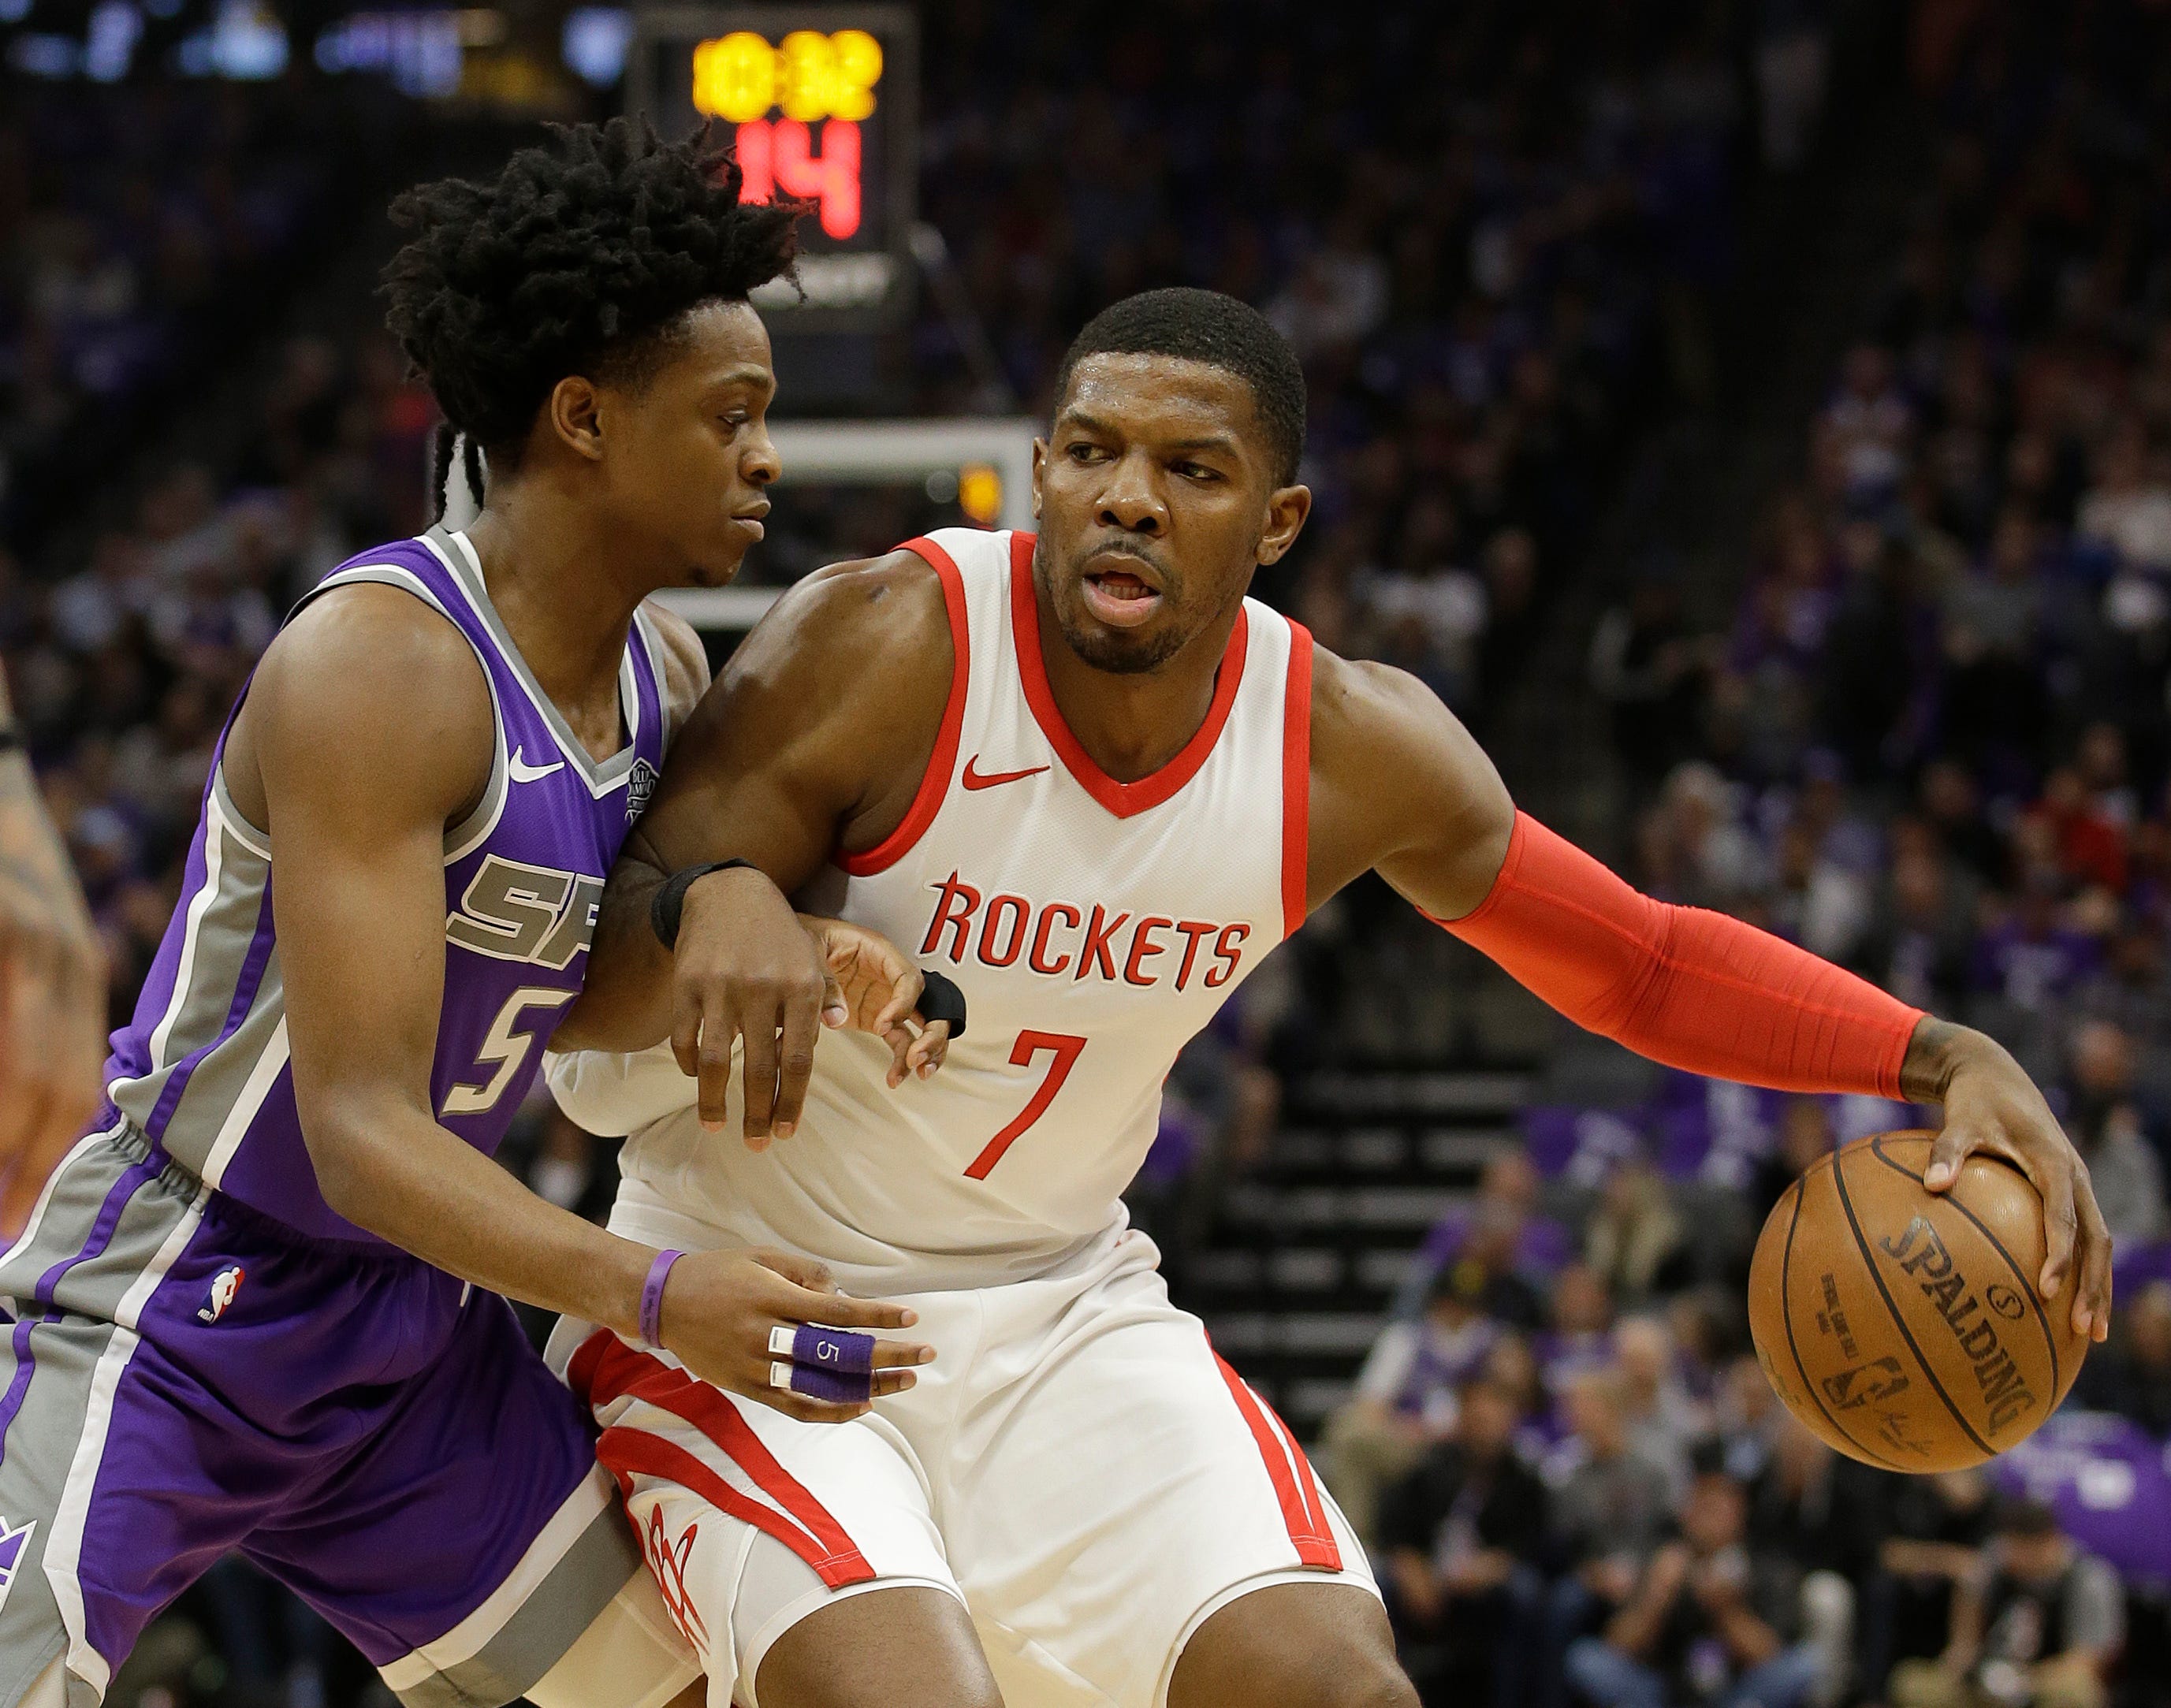 Joe Johnson last played in the NBA in 2018, when he averaged 6.8 points and 3.1 rebounds with the Utah Jazz and Houston Rockets. He didn’t play in the NBA last season but is looking to reboot with the Pistons.